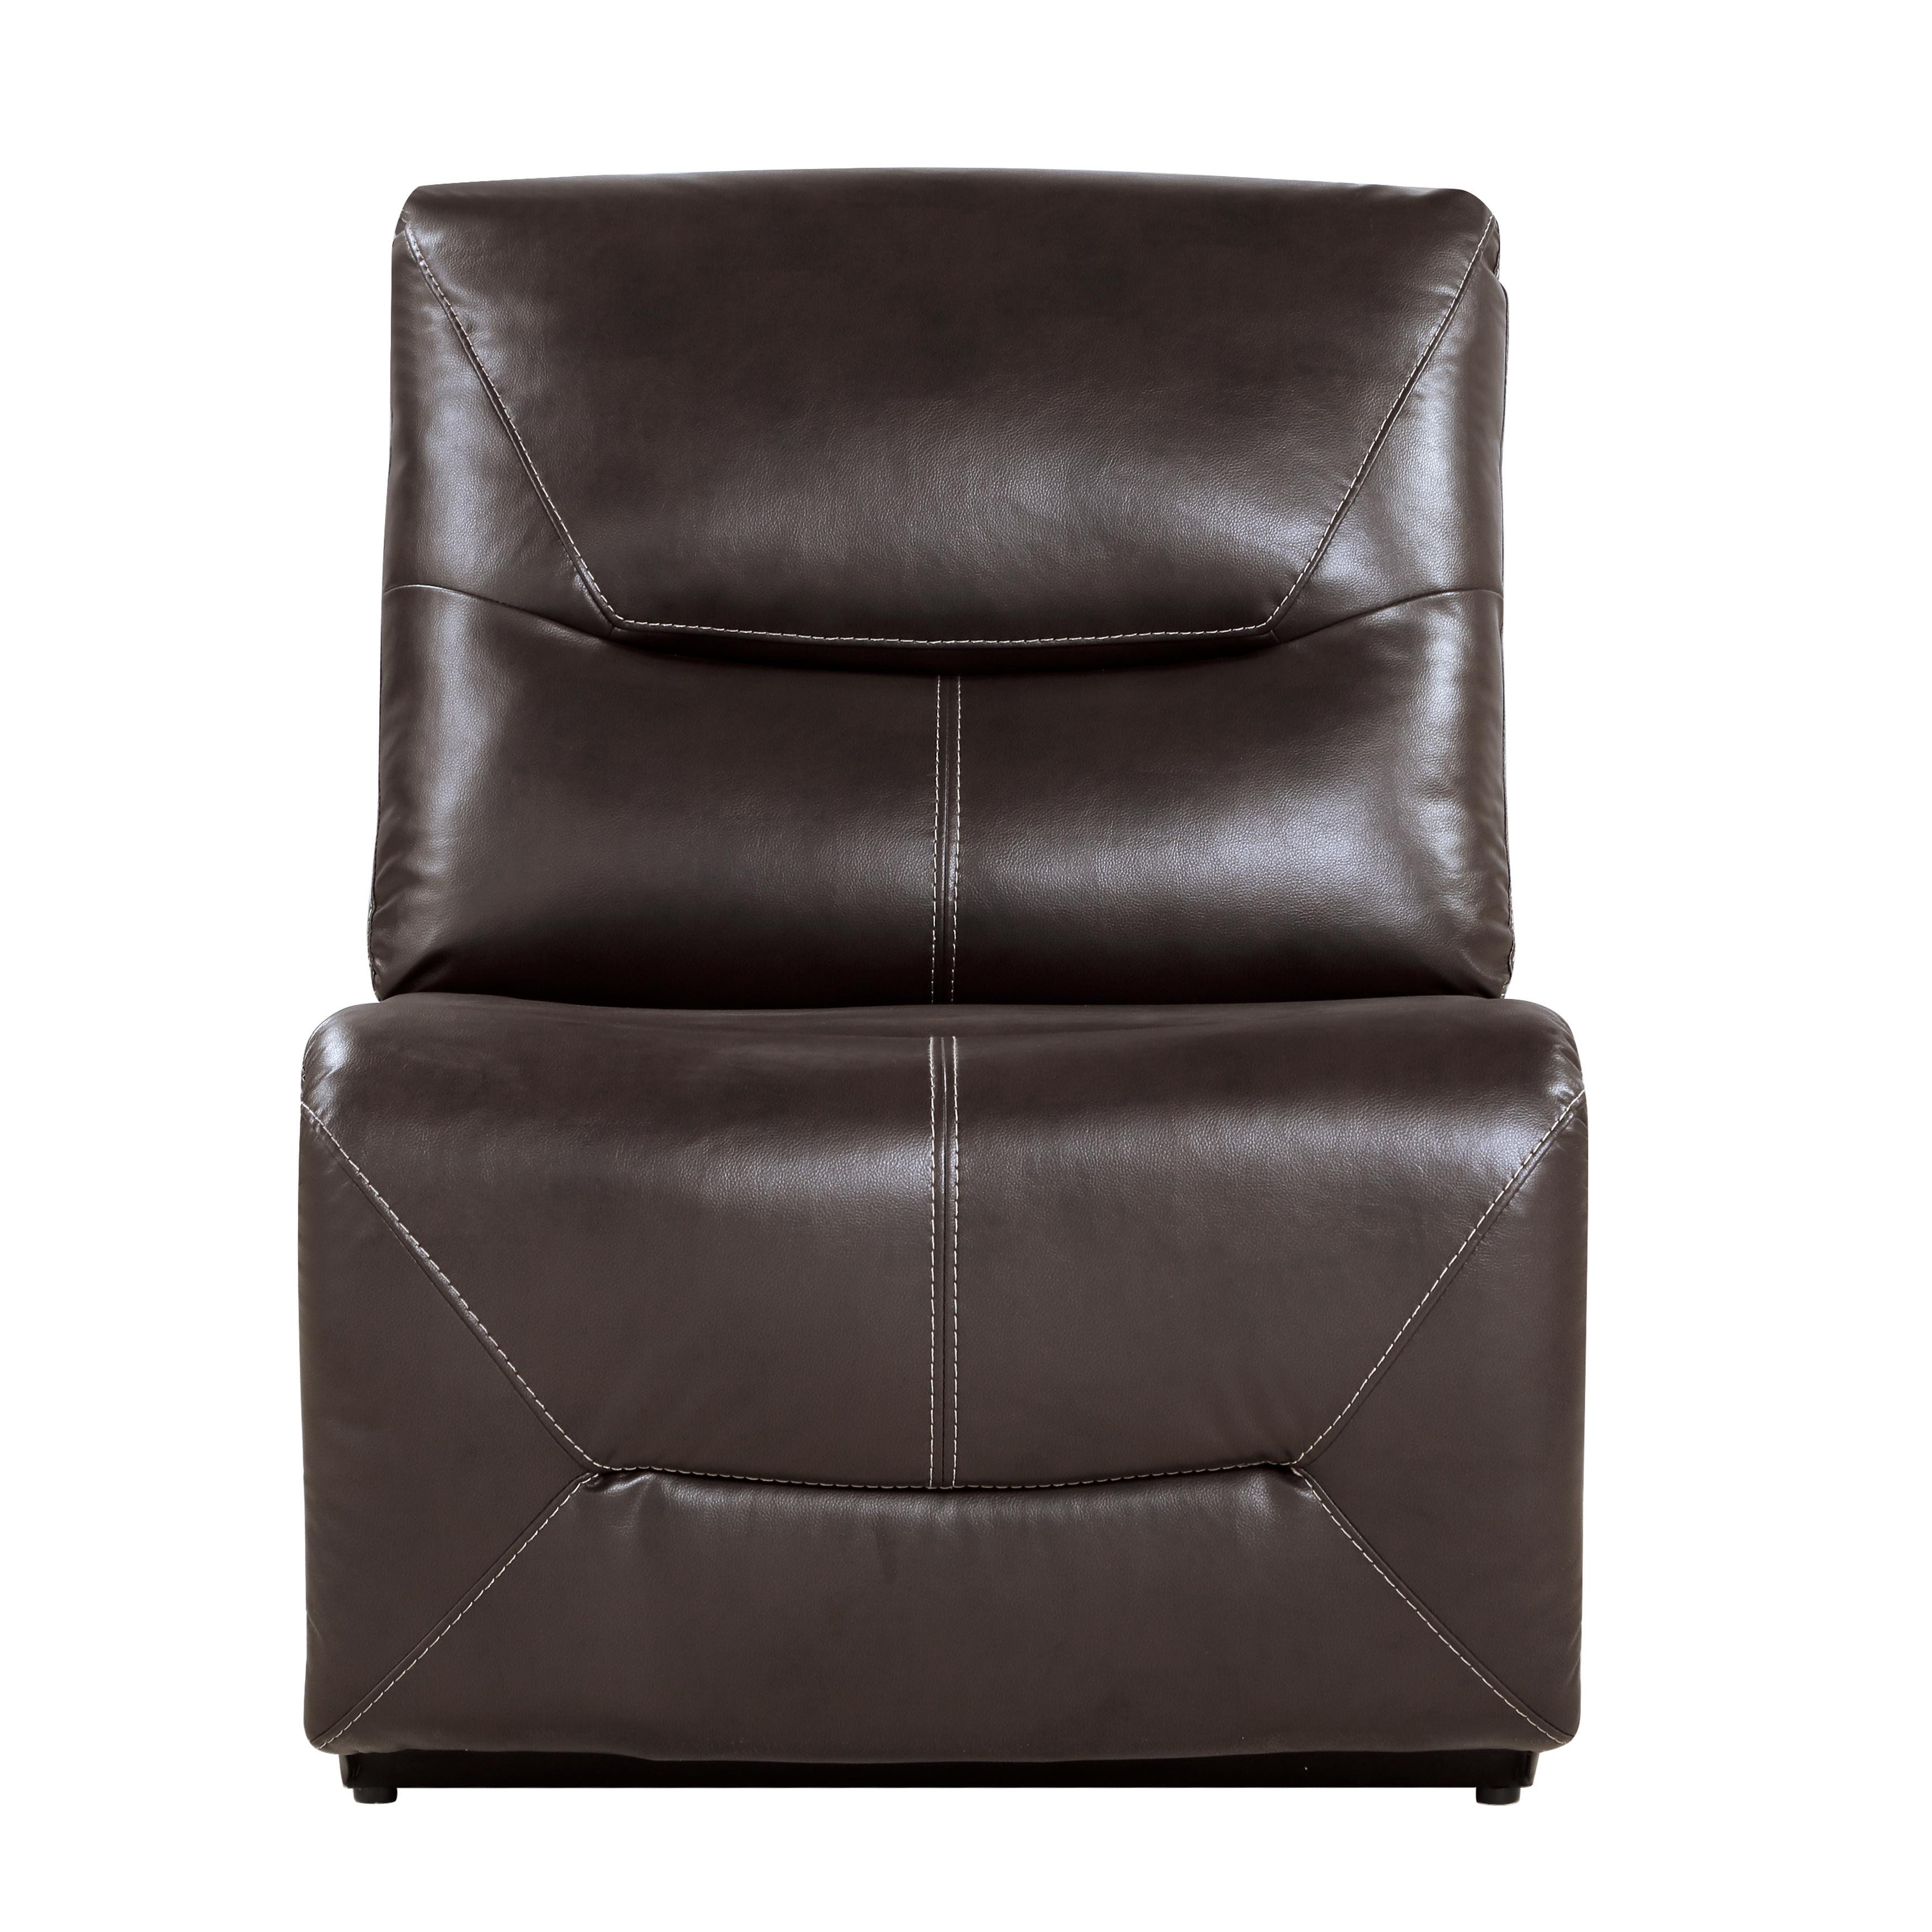 Transitional Armless Chair 9579BRW-AC Dyersburg 9579BRW-AC in Brown Faux Leather